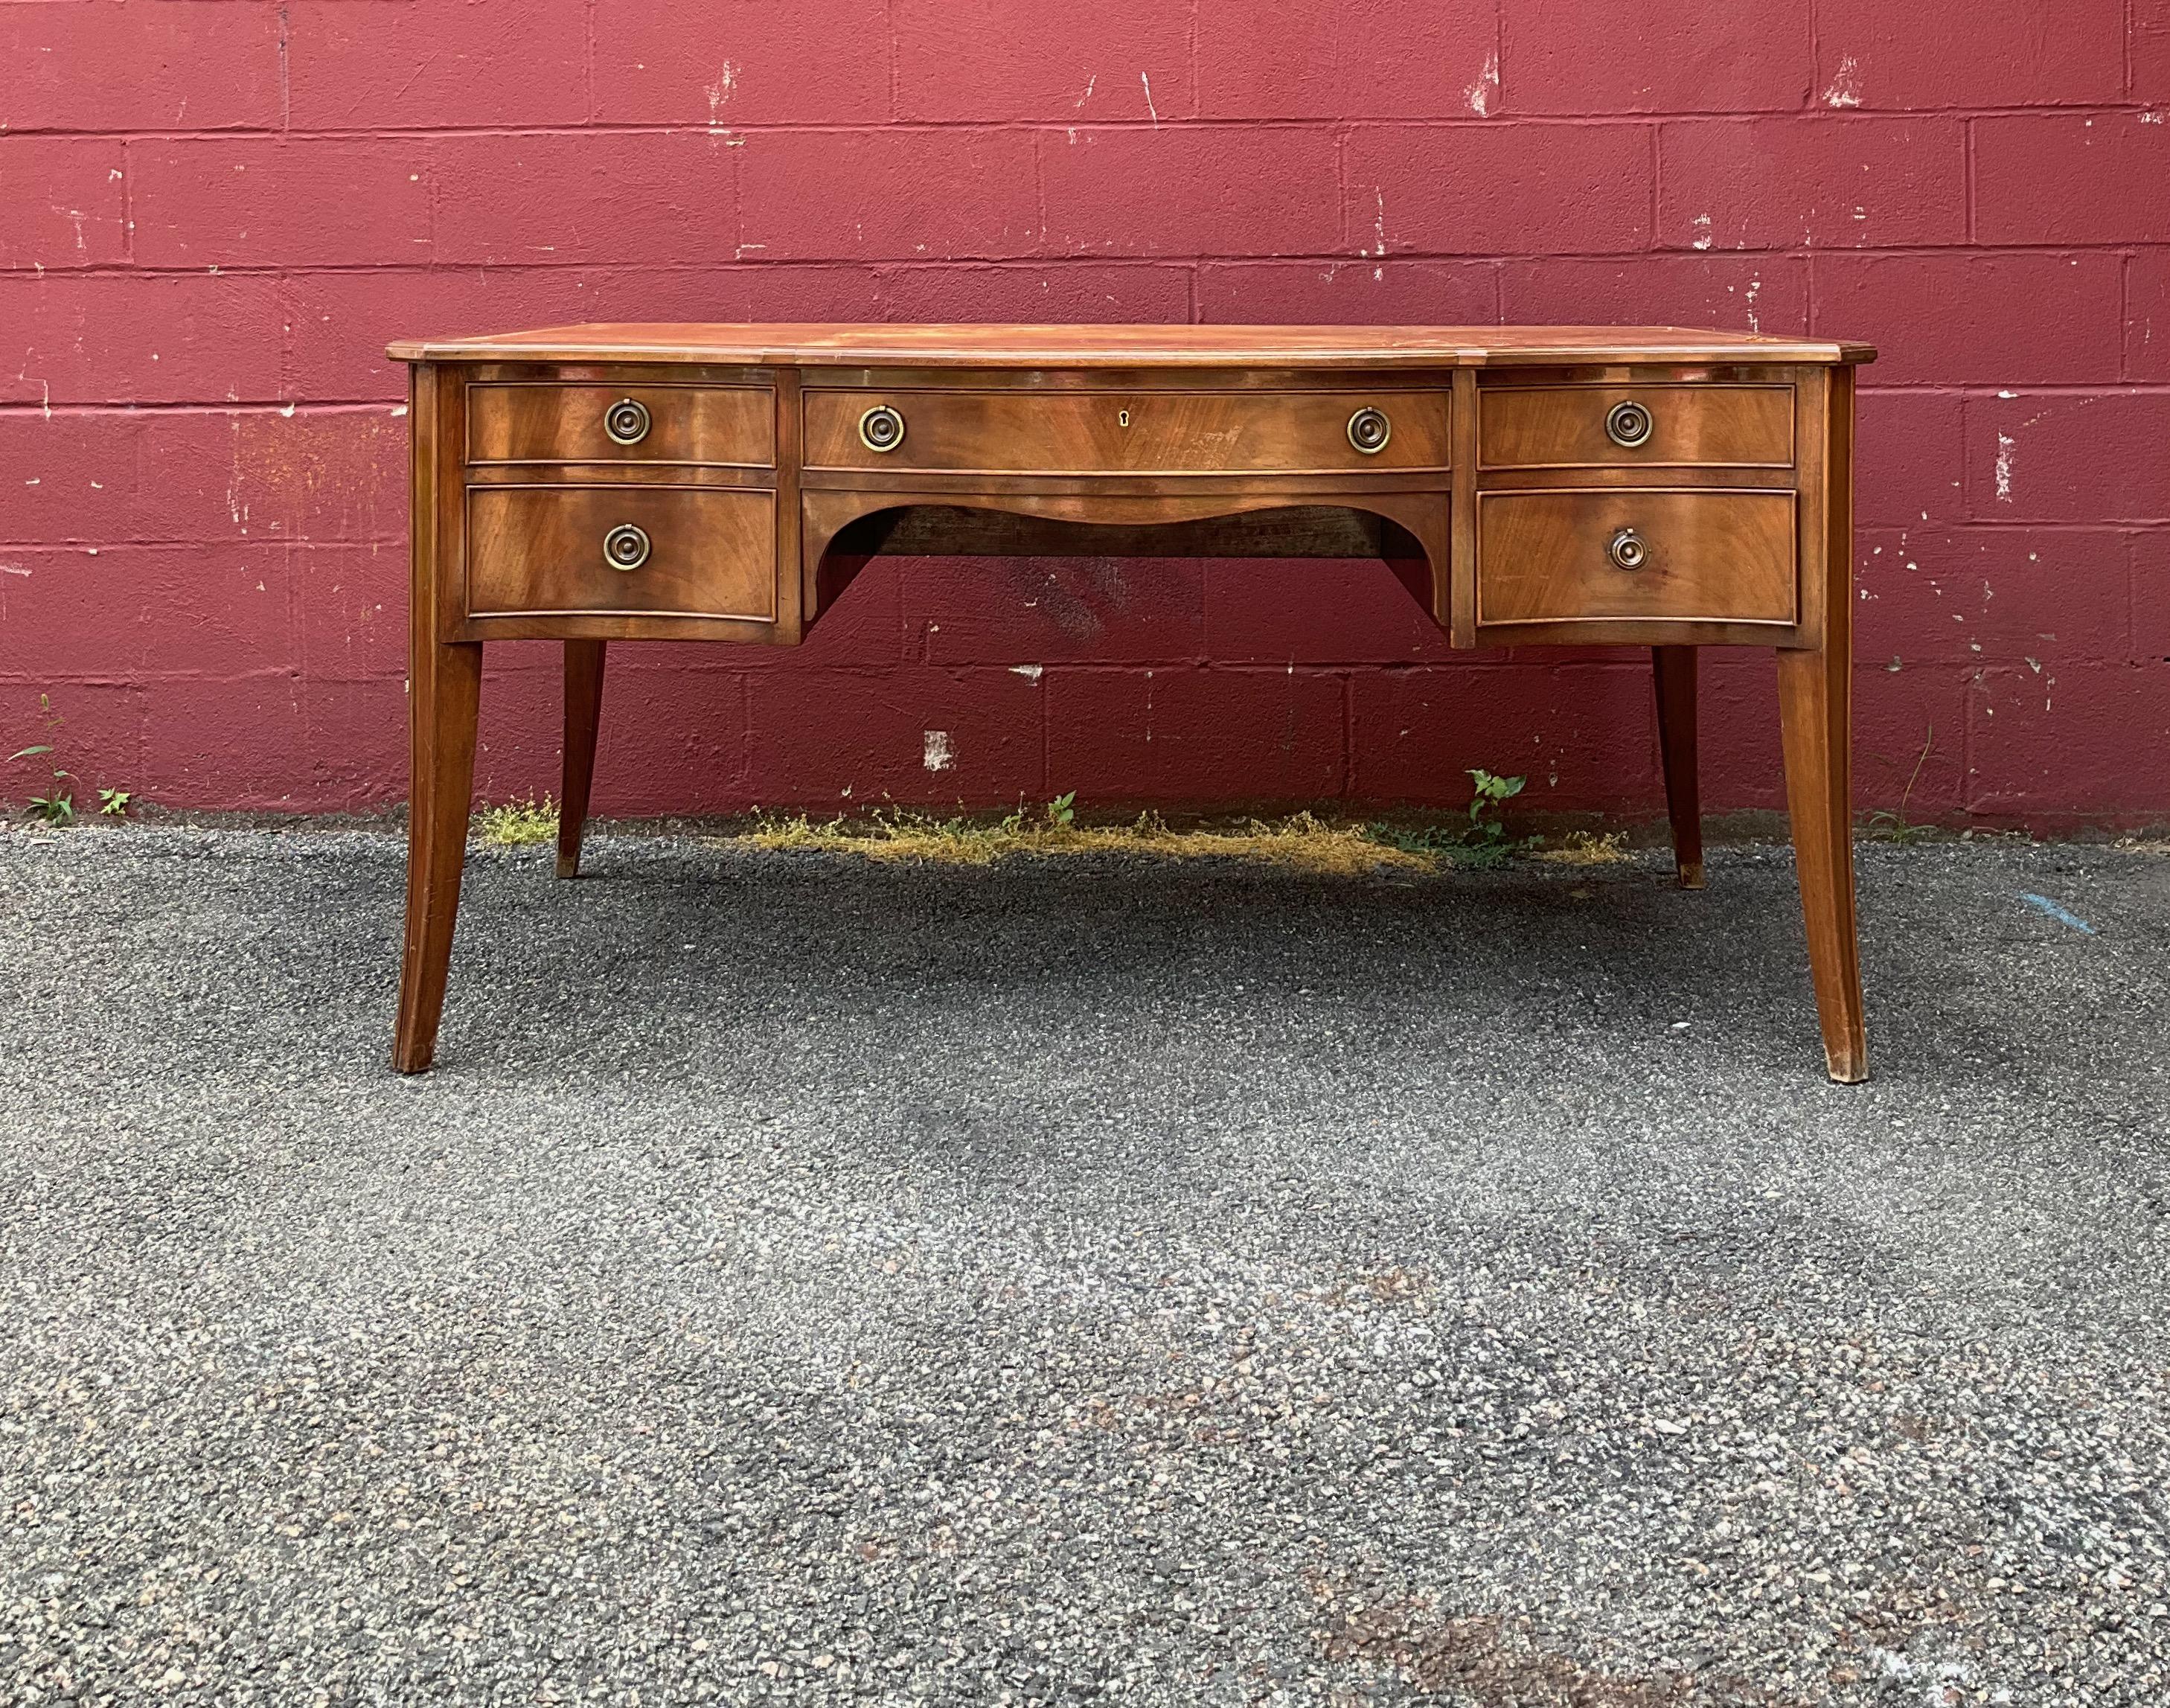 Unusual and handsome mahogany French desk from the 1940s-1950s with a distressed leather top. There is one large central drawer as well as two side drawers on either side and the back of the desk is finished so it can float in a room. The tooled